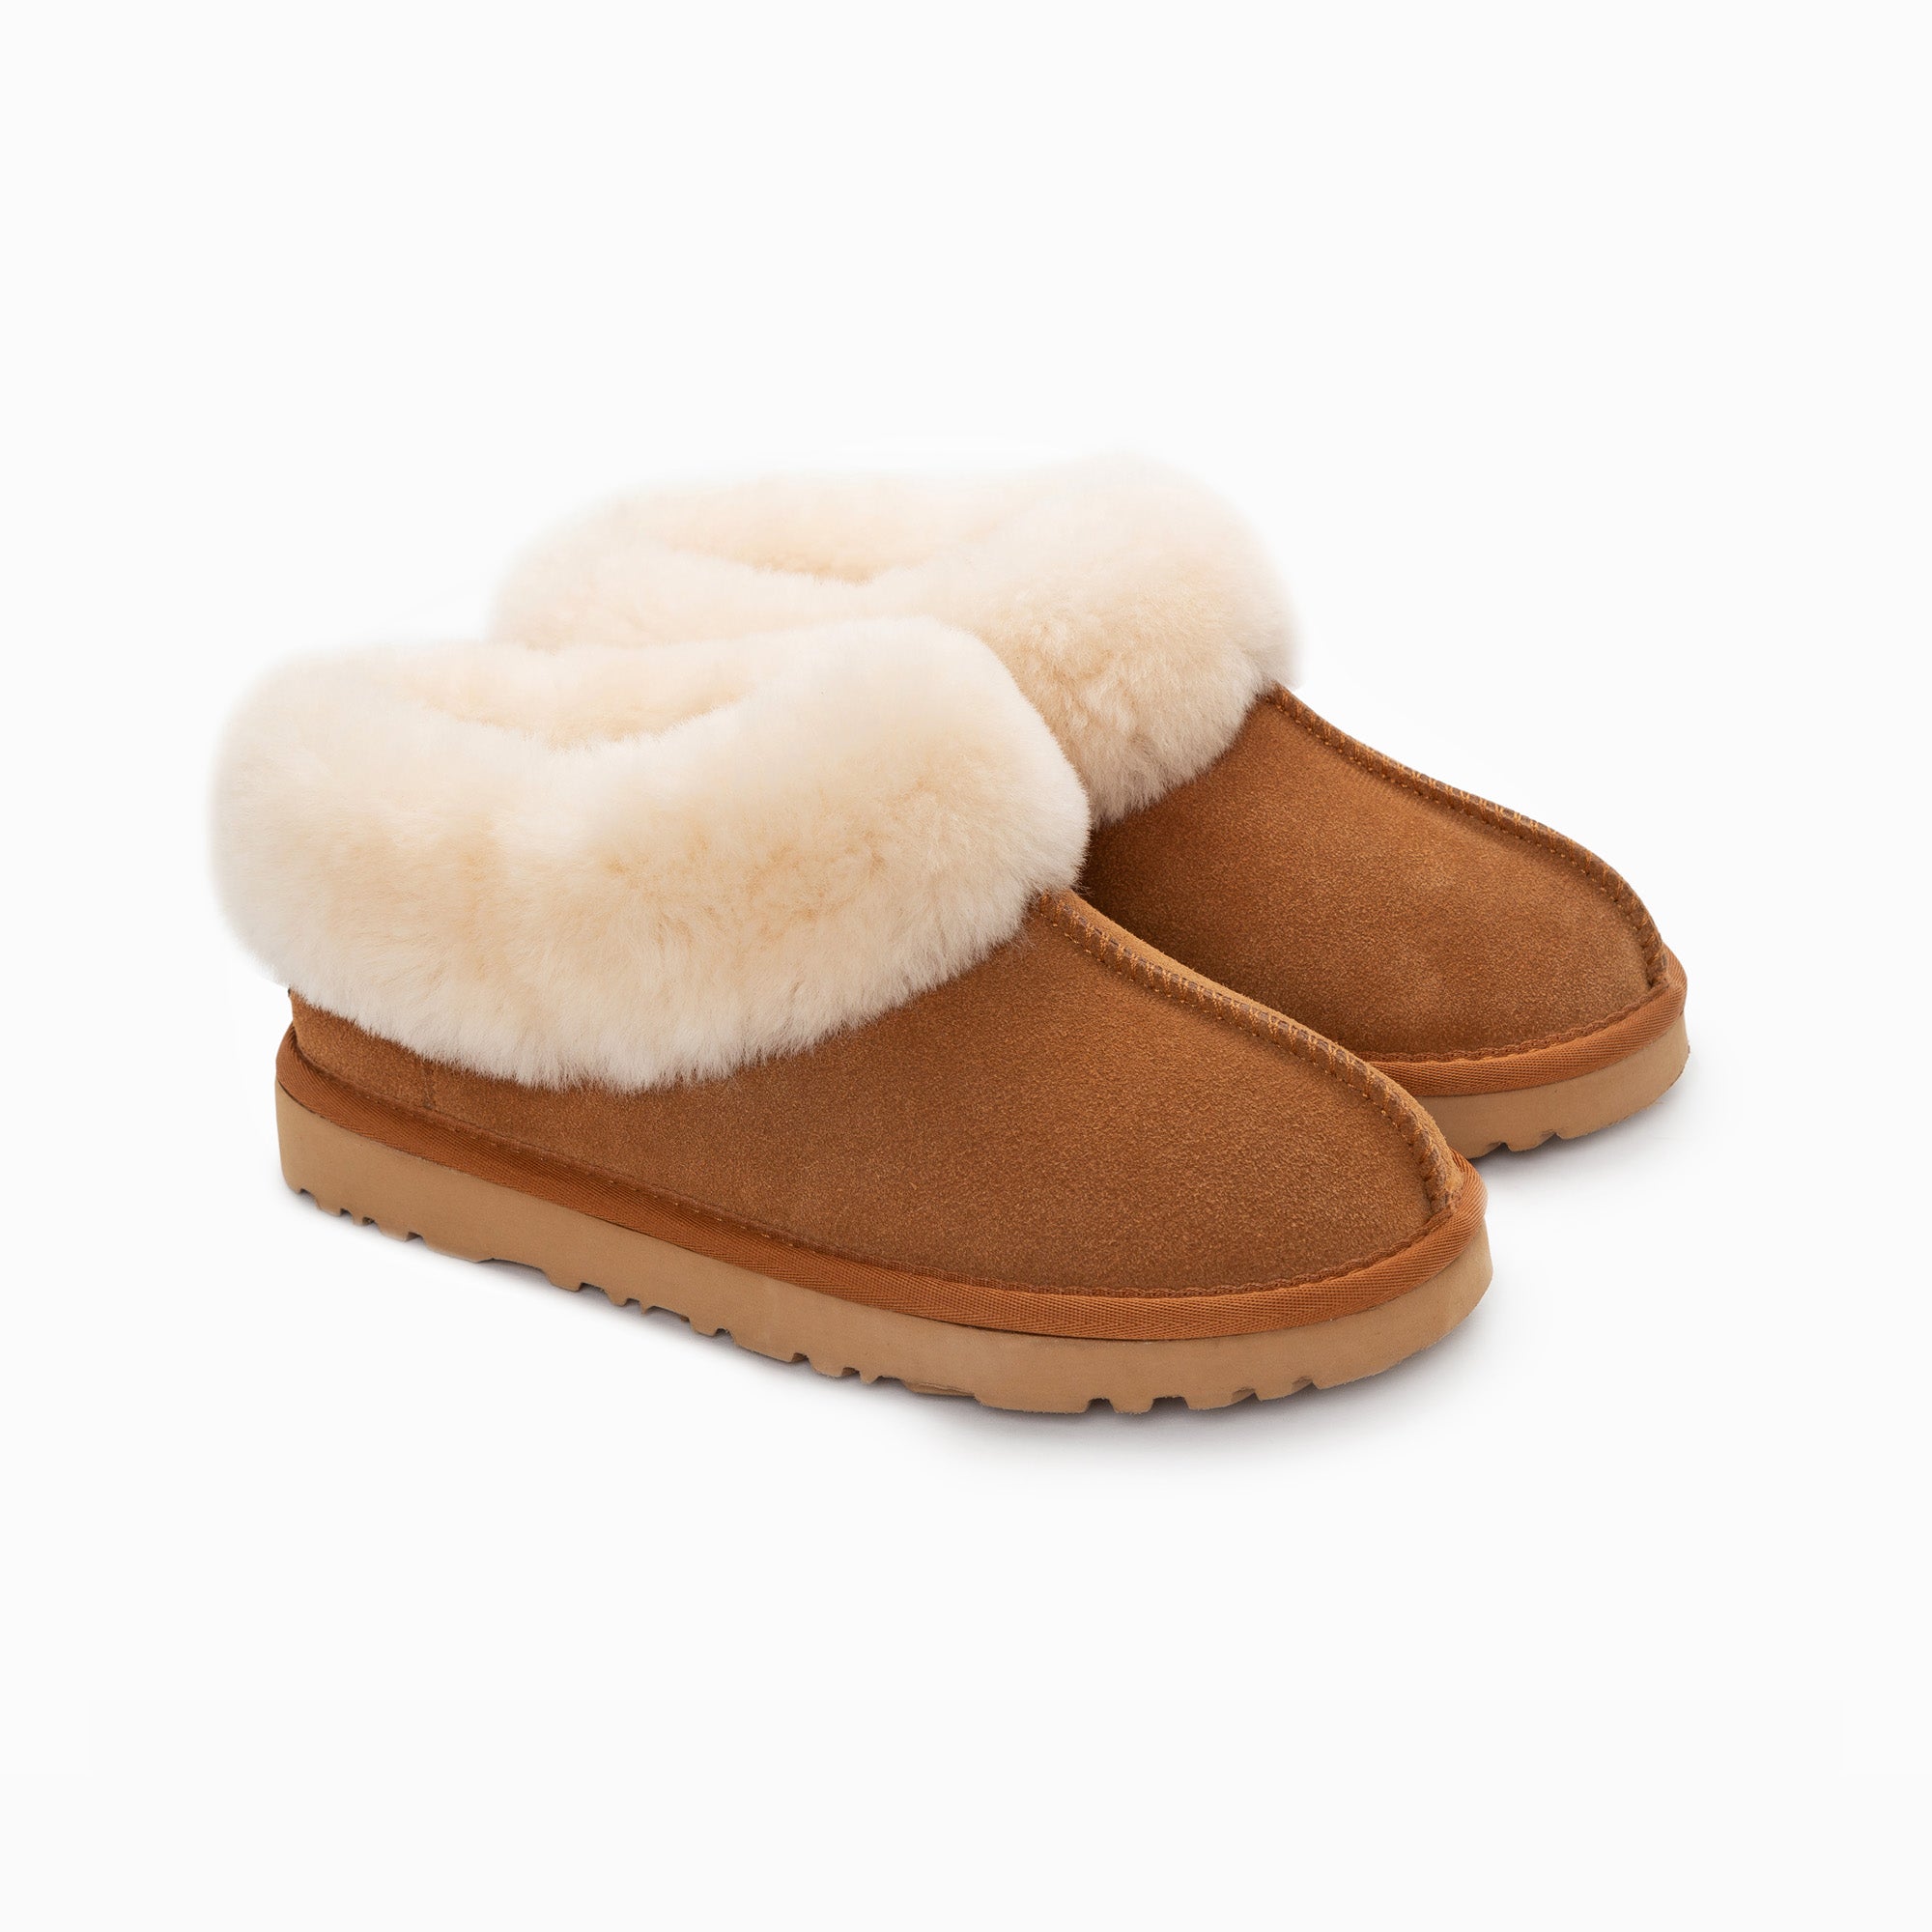 Ladies Moccasin Slippers - The Silver Moccasin